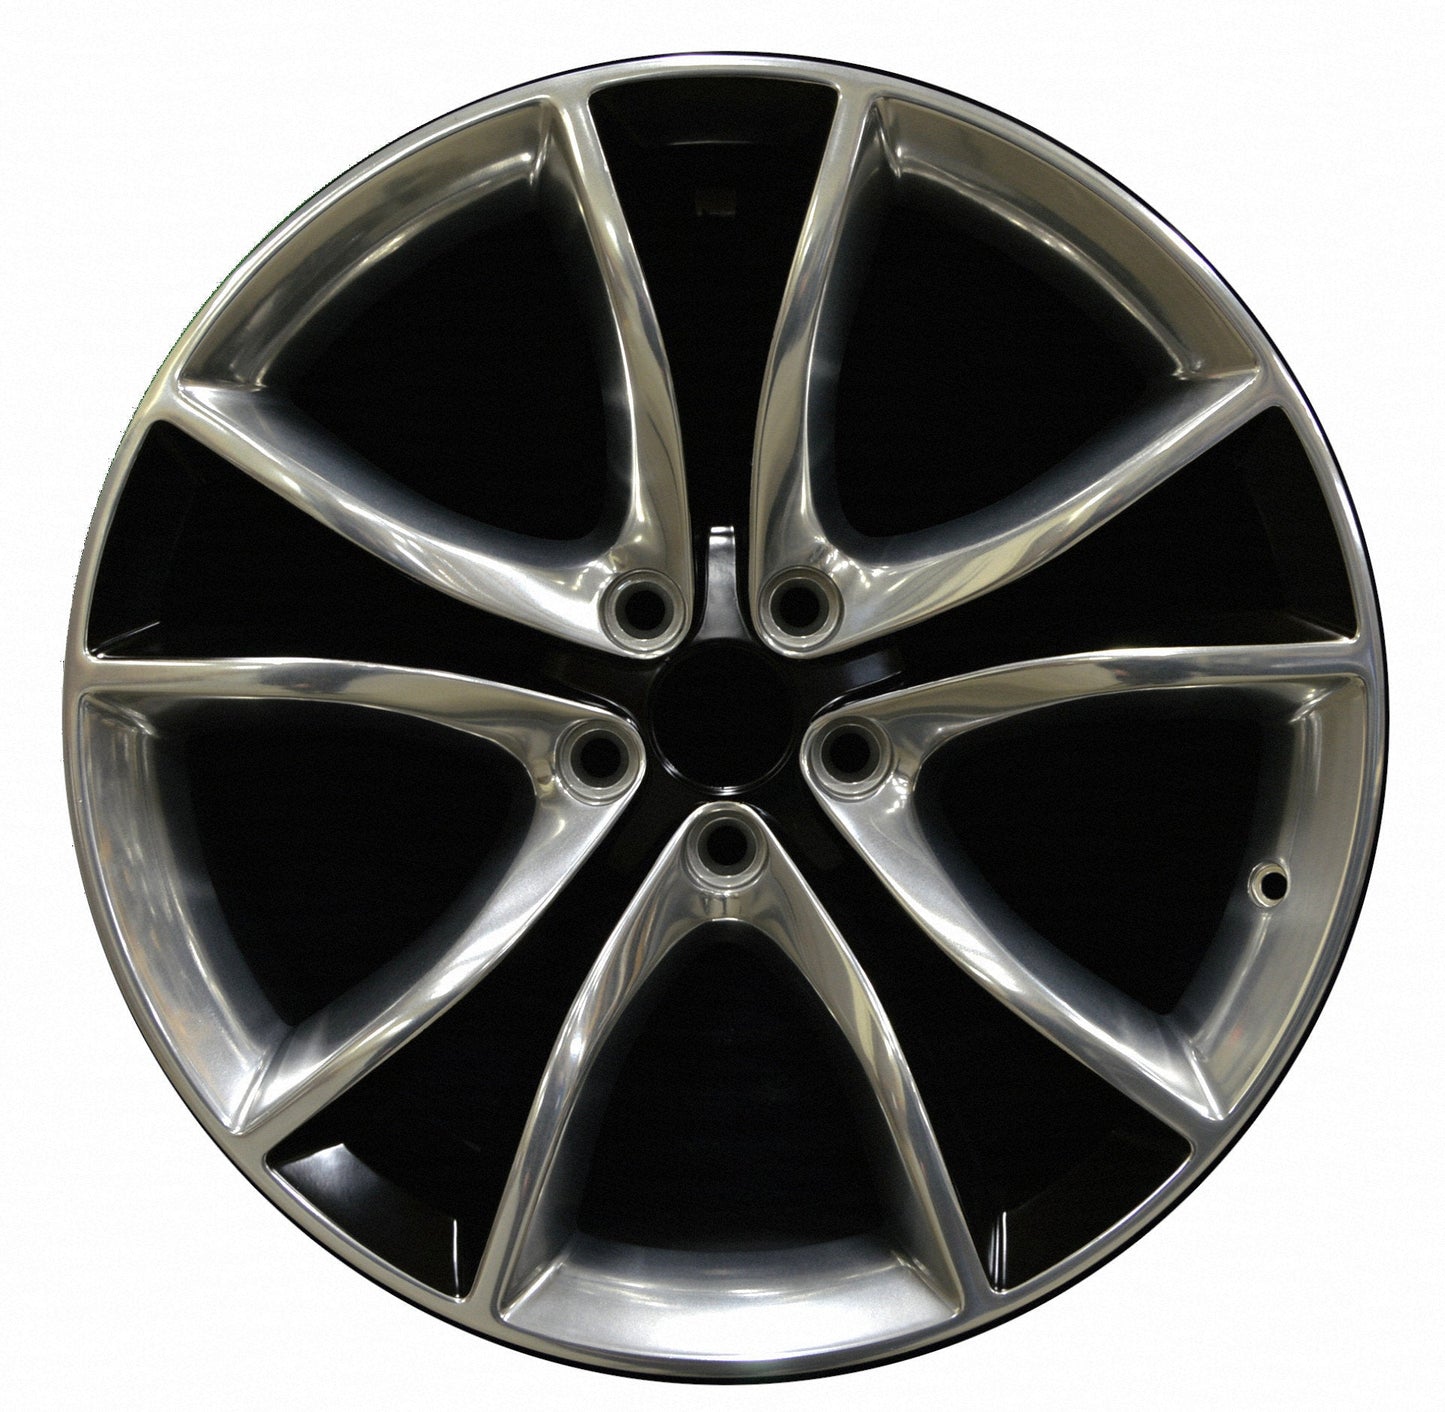 Dodge Charger  2015, 2016, 2017 Factory OEM Car Wheel Size 20x8 Alloy WAO.2545.LB01.POLC4